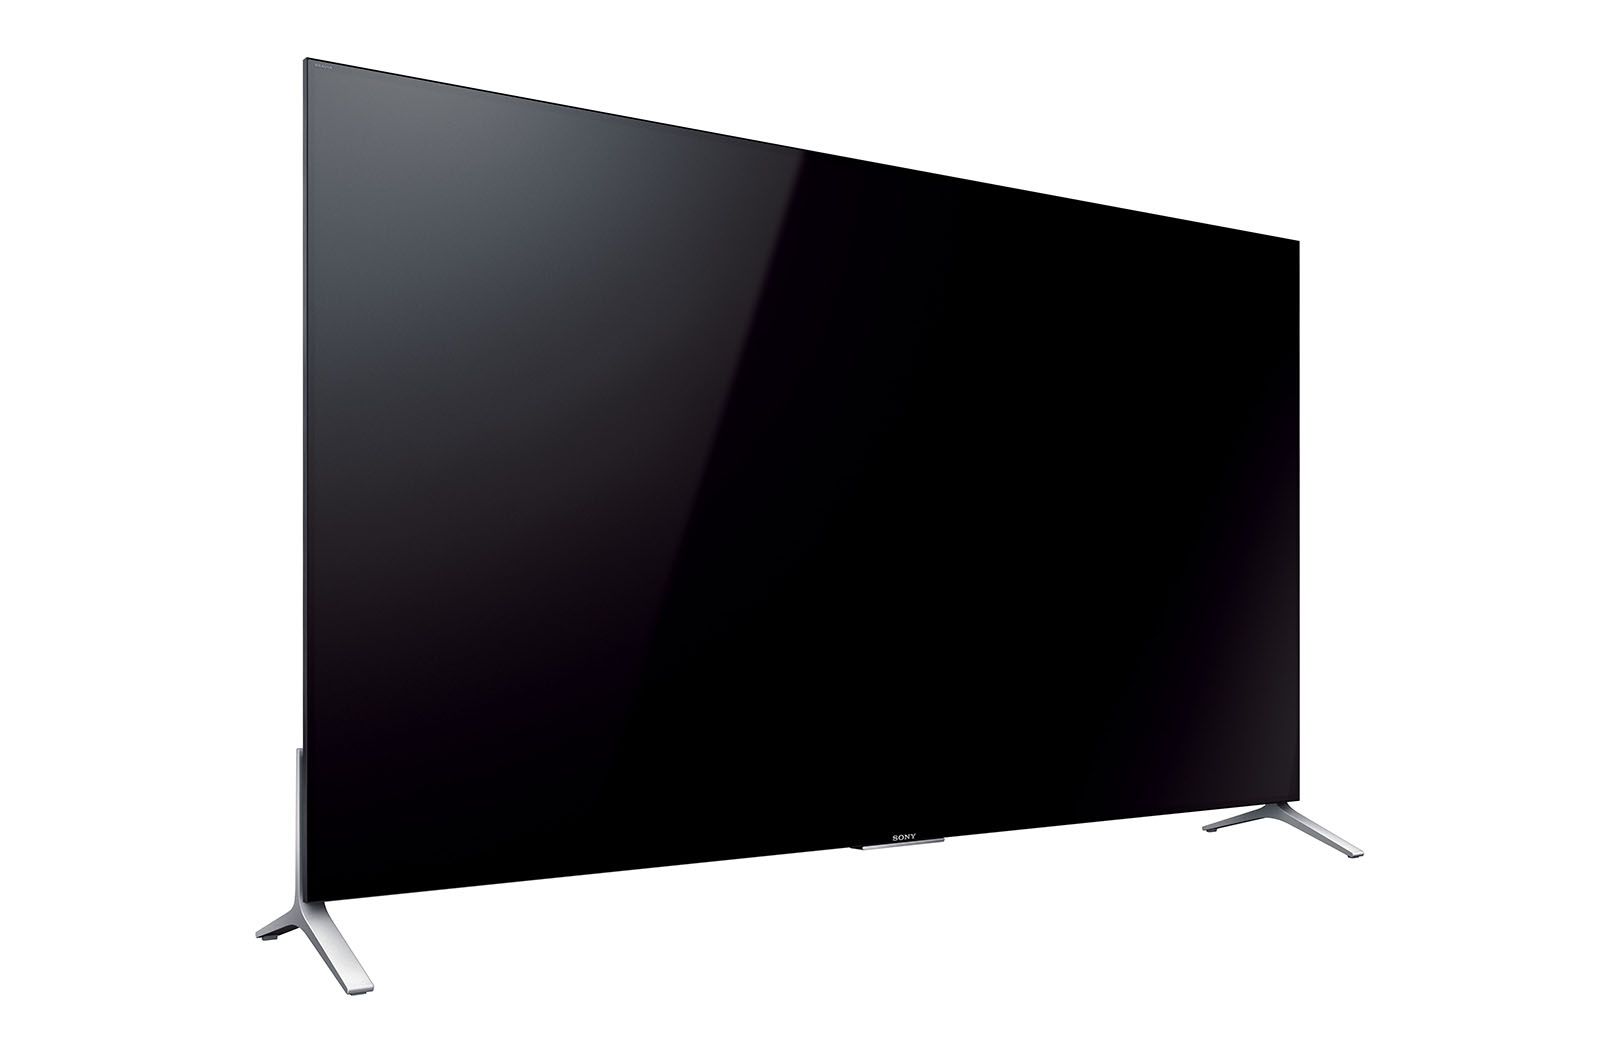 sony adding hdr compatibility to its 4k uhd bravia tvs including the new 75 inch x91c image 1